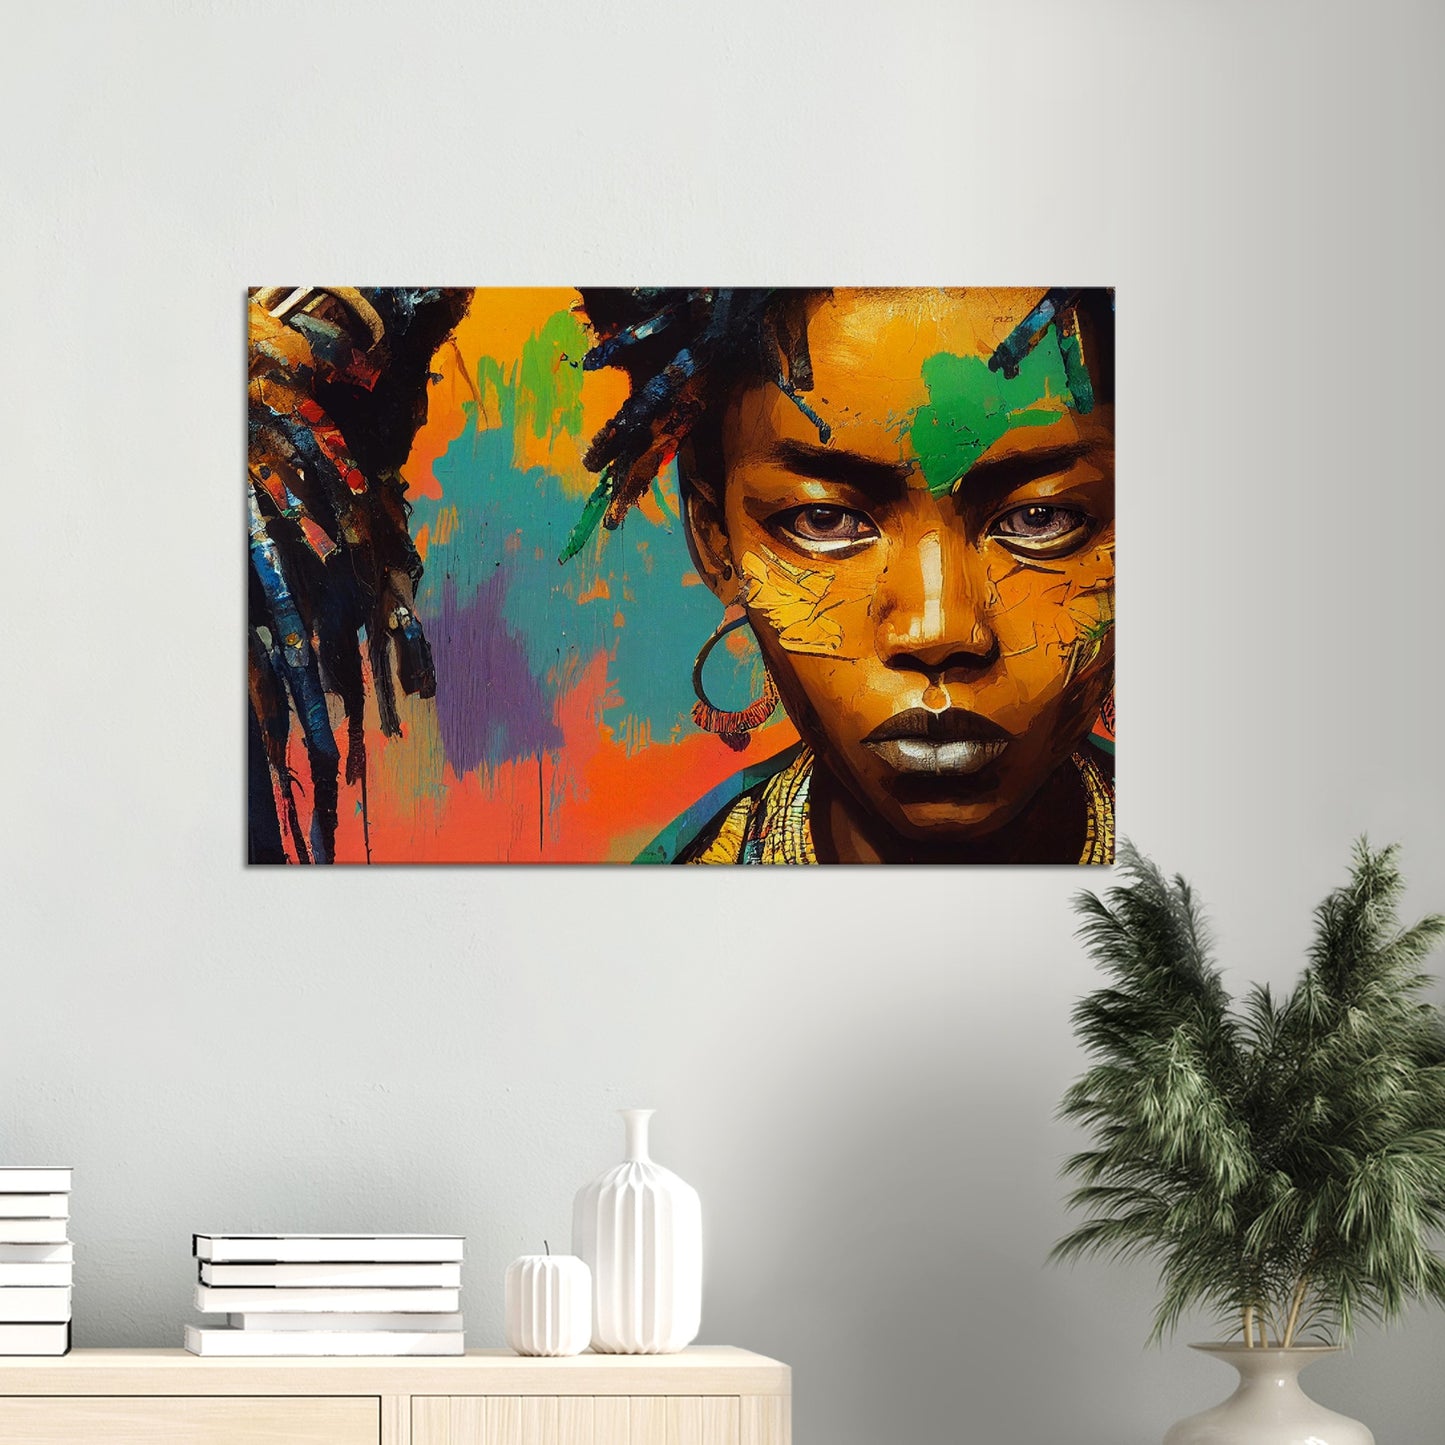 African Tribe Girl - Urban Art on Canvas